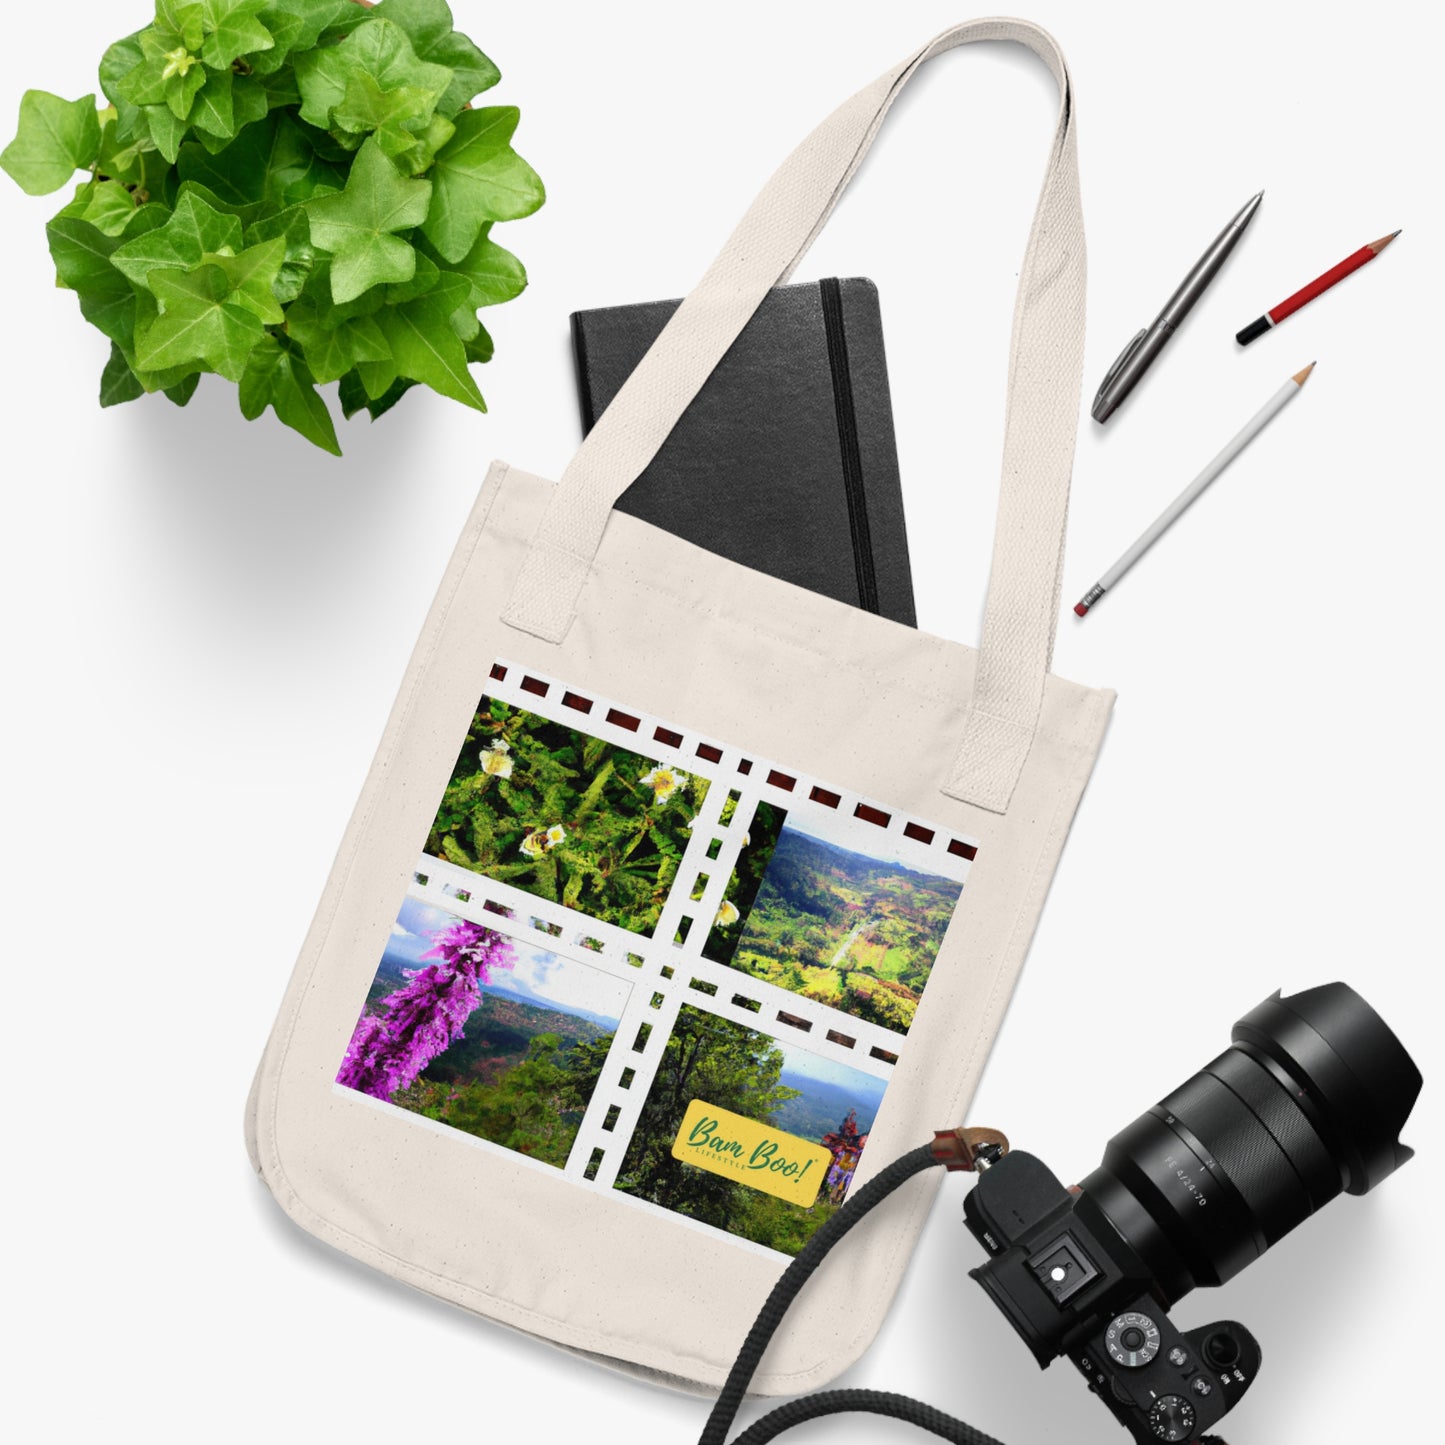 "Picture Perfect: Blending Art and Photography Into a Unique Collage" - Bam Boo! Lifestyle Eco-friendly Tote Bag